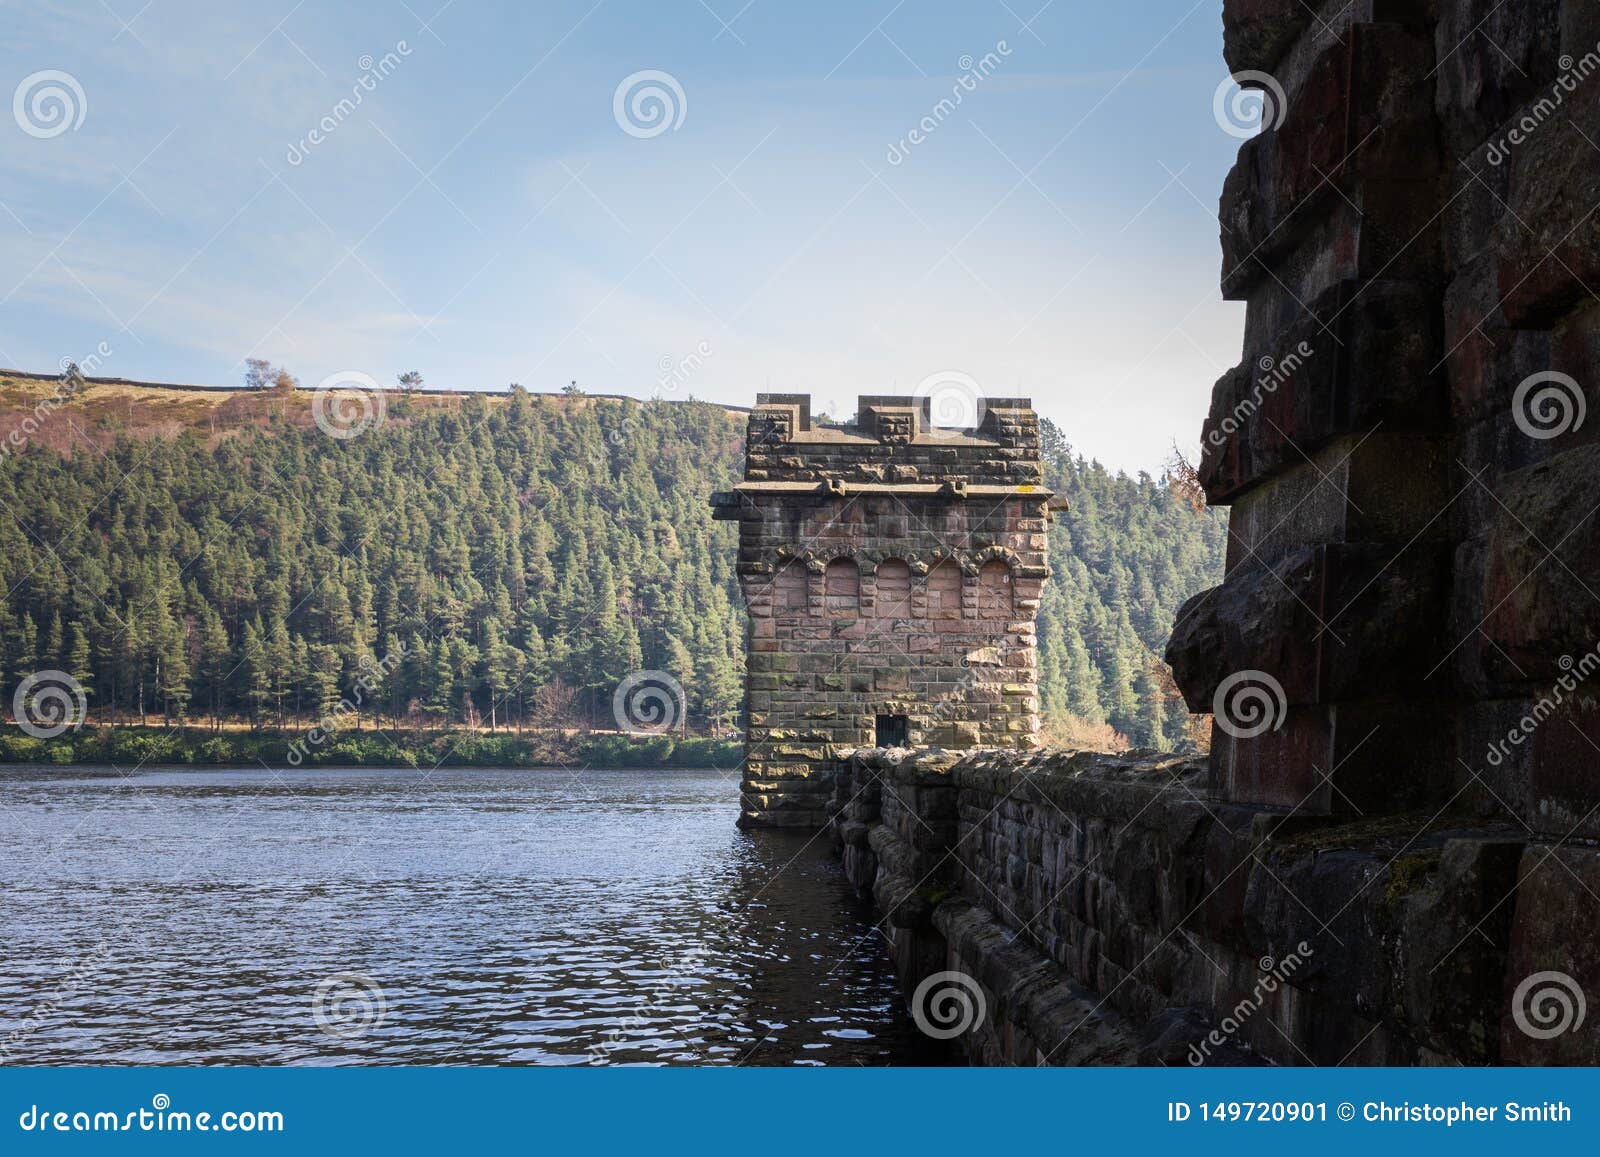 542 Derwent Reservoir Photos Free Royalty Free Stock Photos From Dreamstime